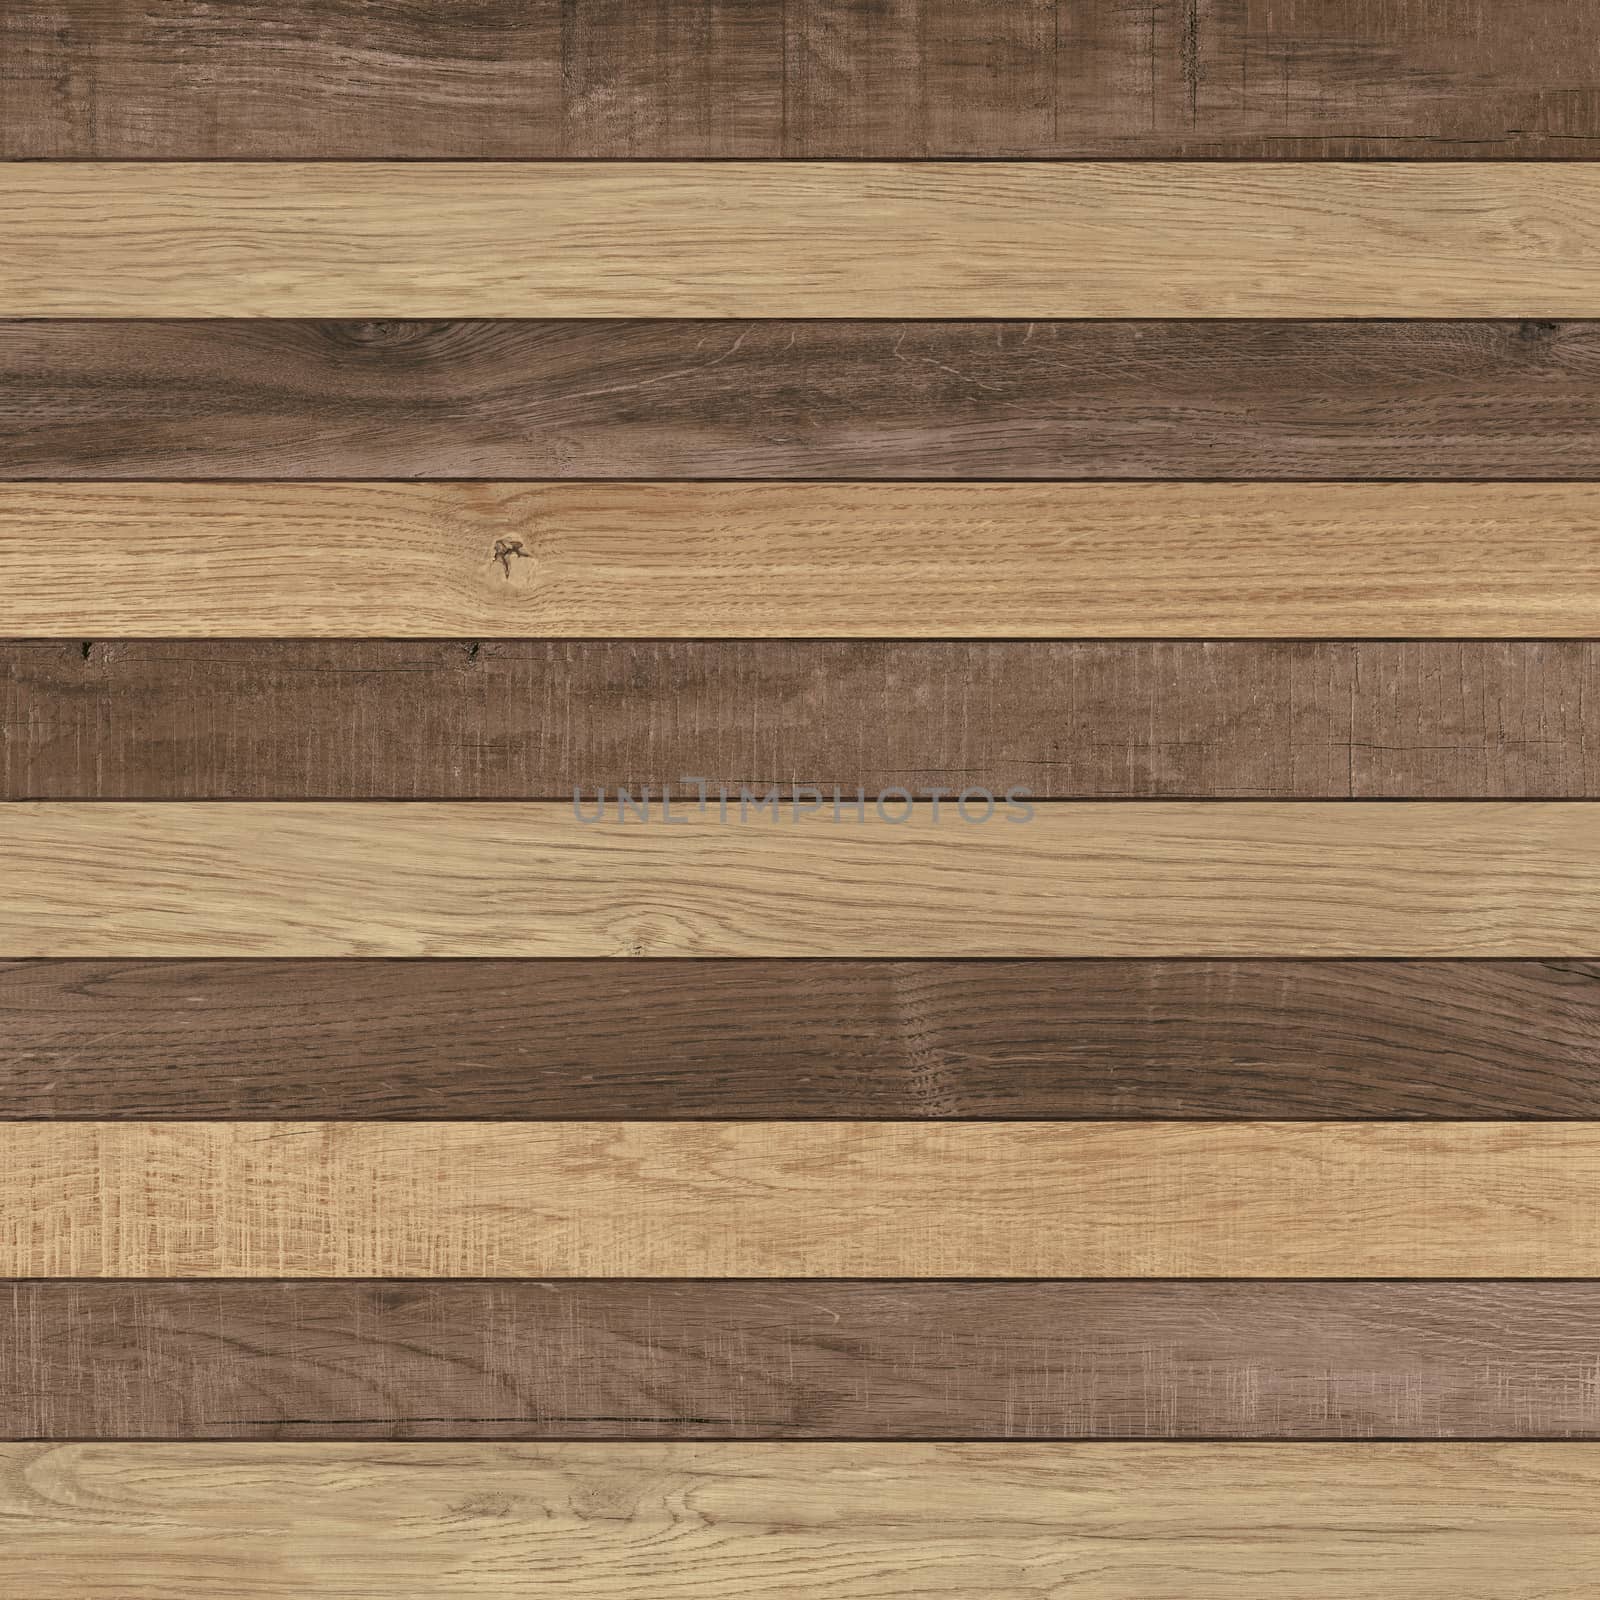 Wood Texture Background. High.Res. by mg1408